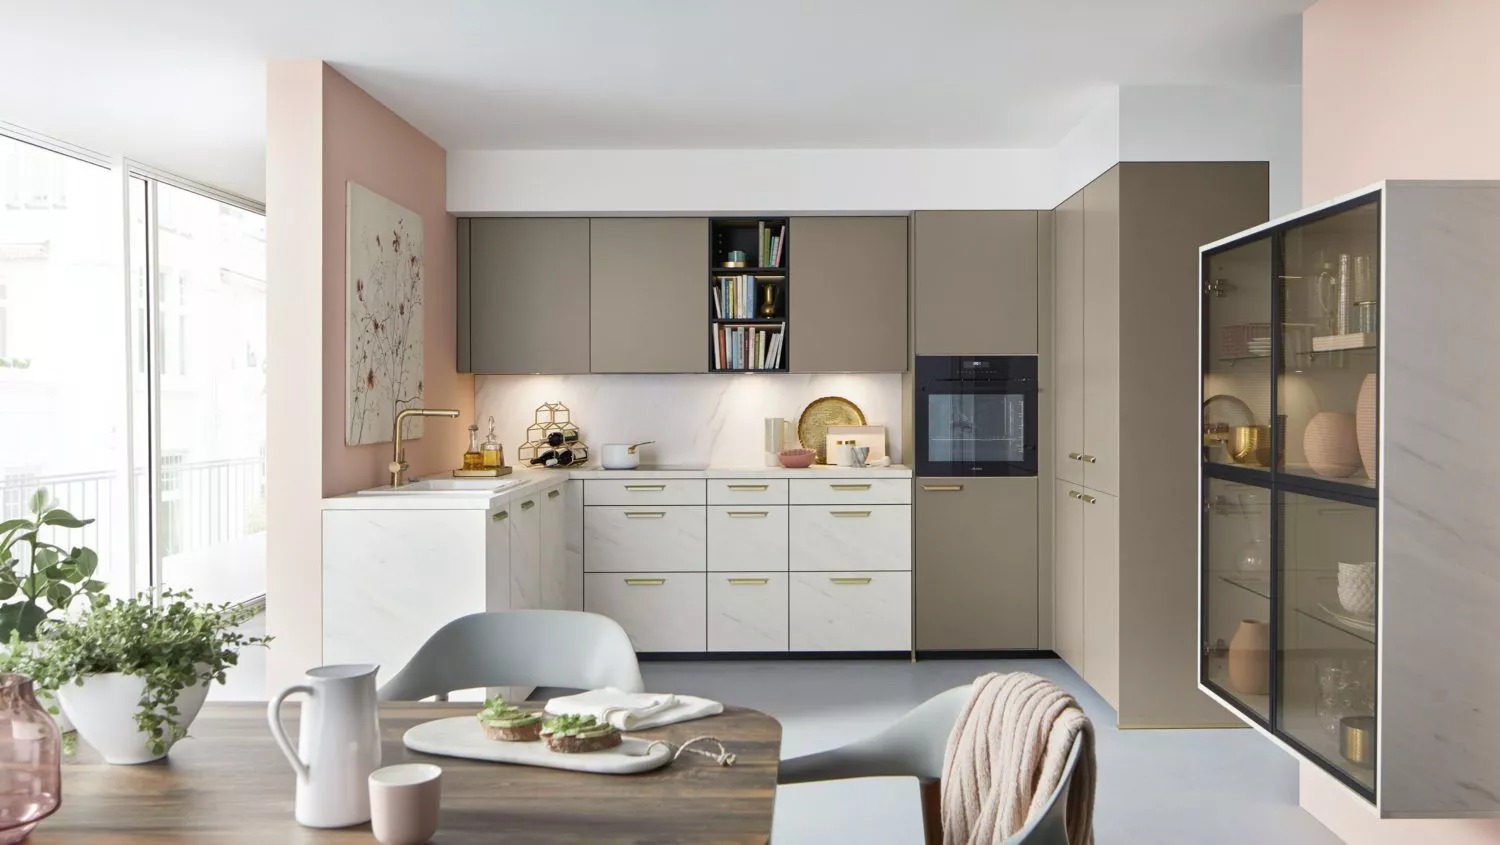 A Few Modular Kitchen Design Tips For First-Timers